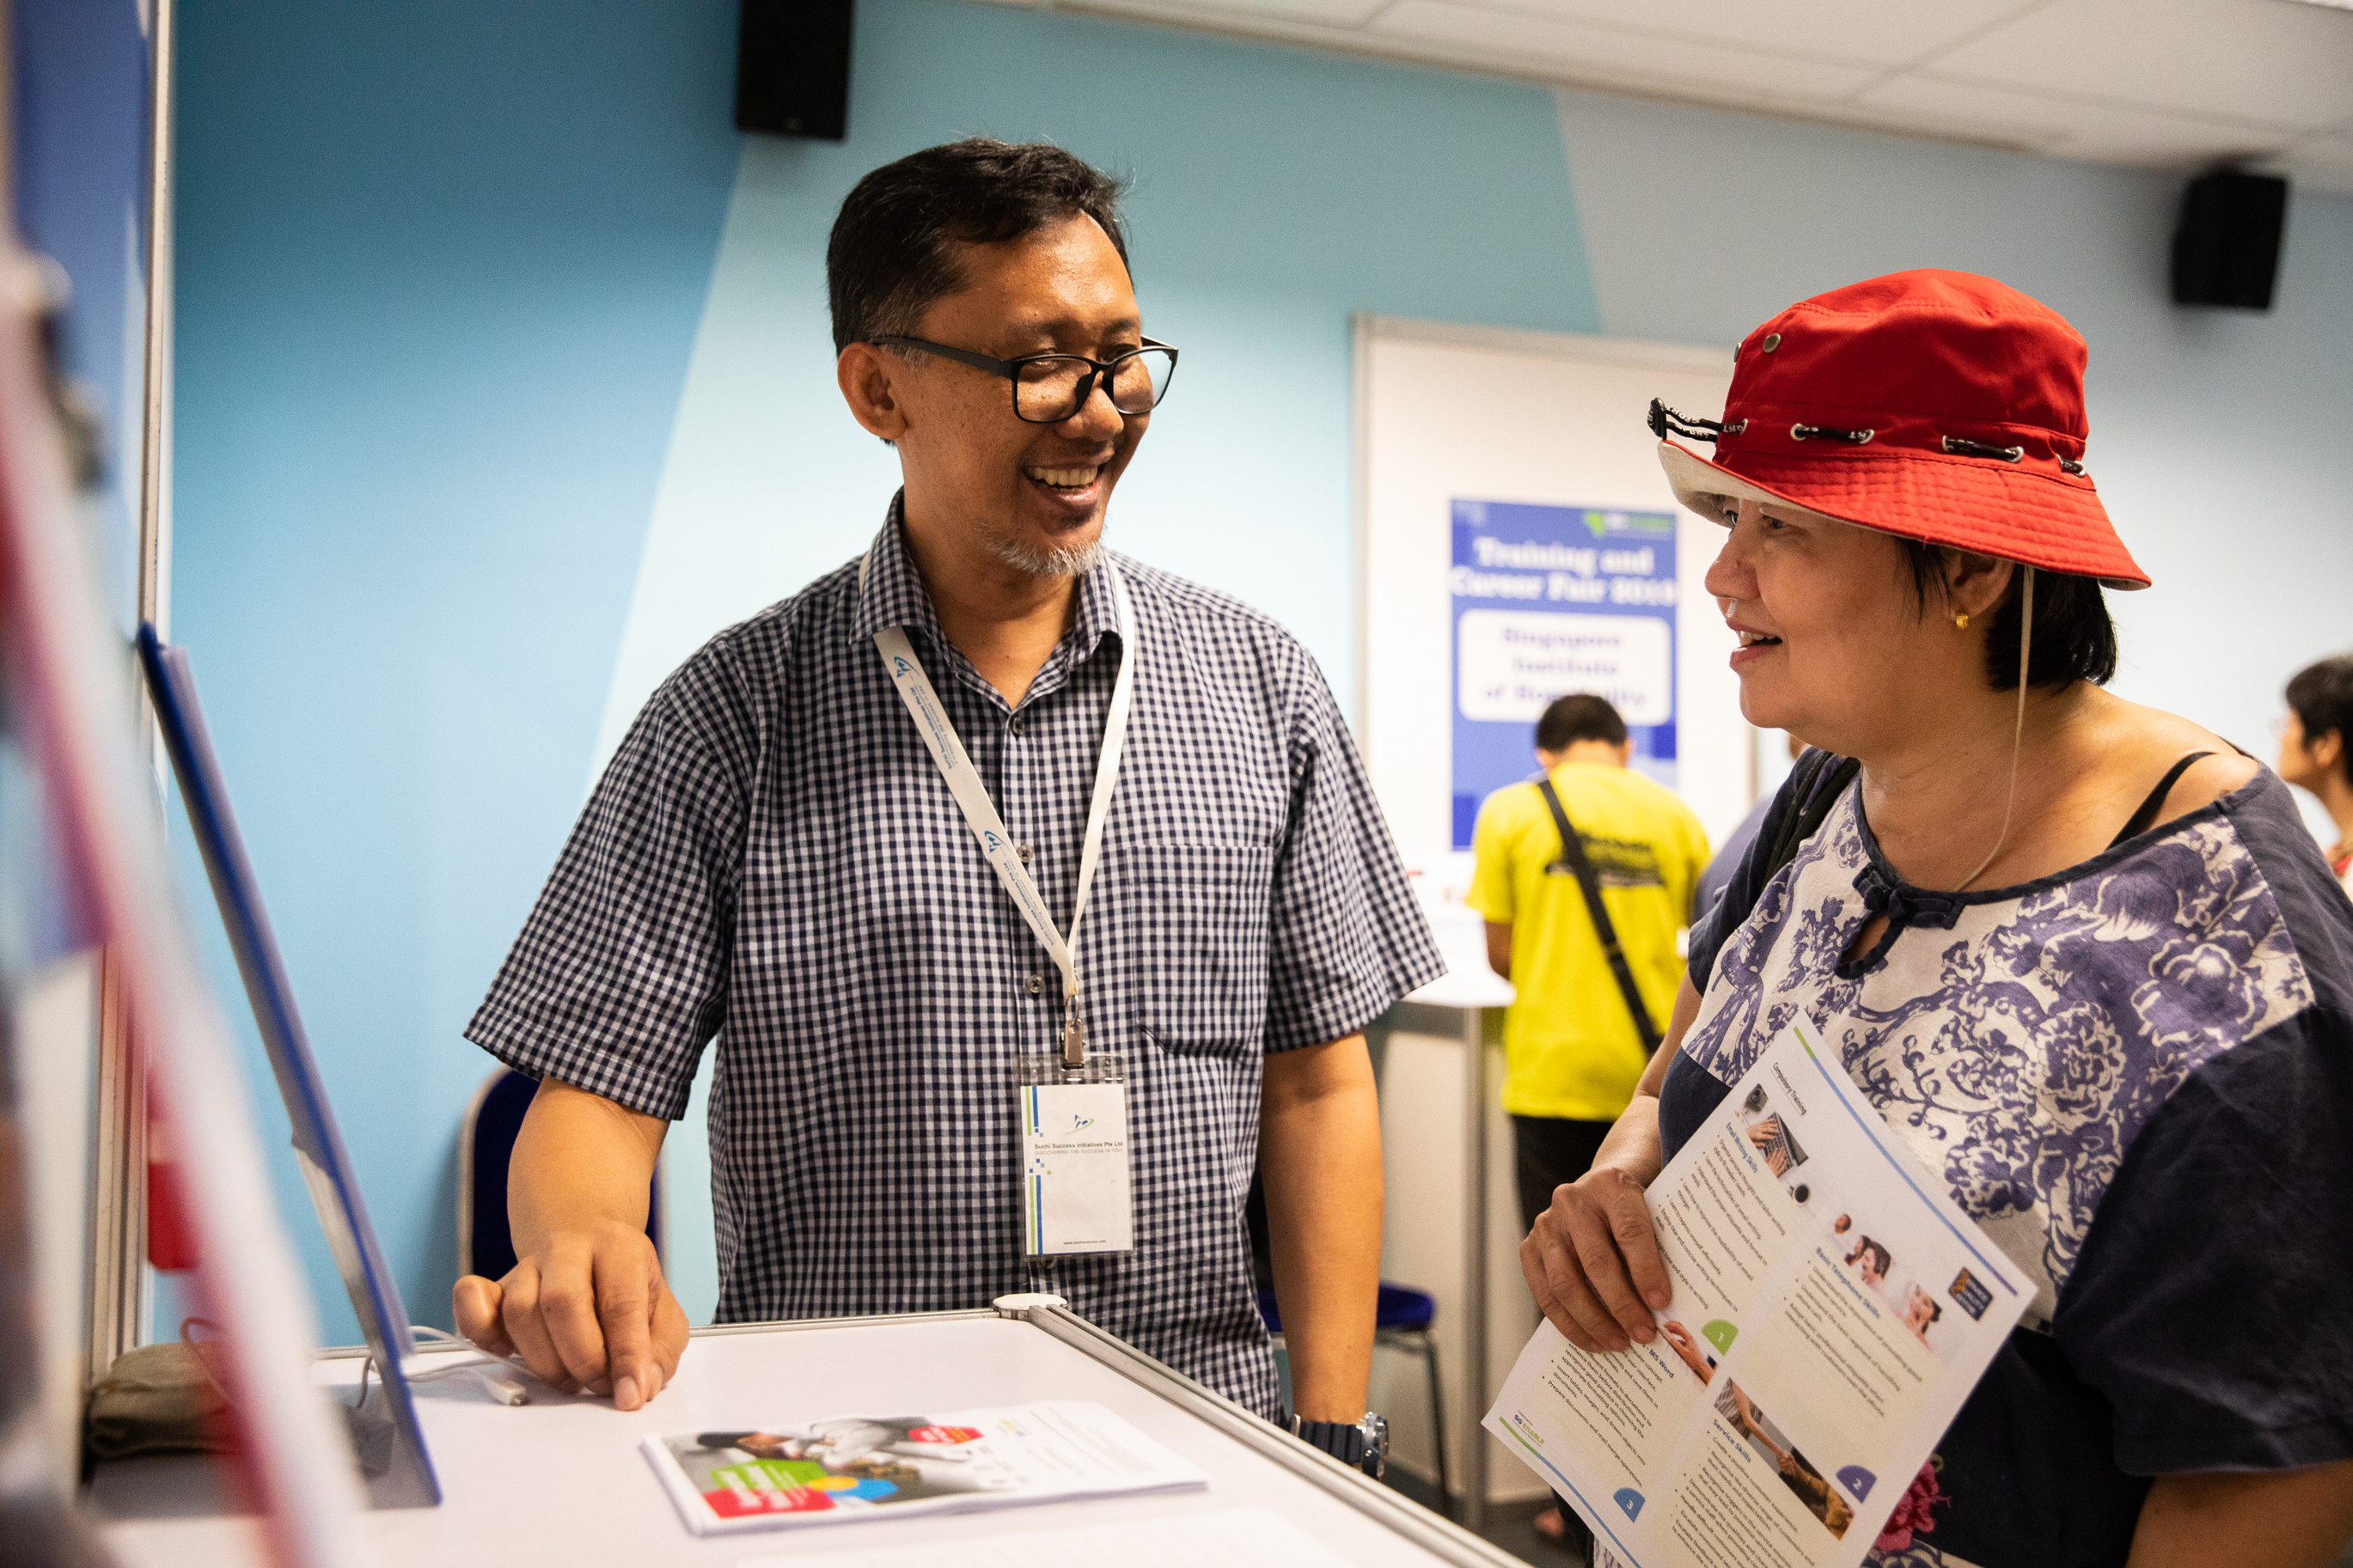 A bespectacled man speaks to a woman wearing a red bucket hat who is holding onto a brochure.